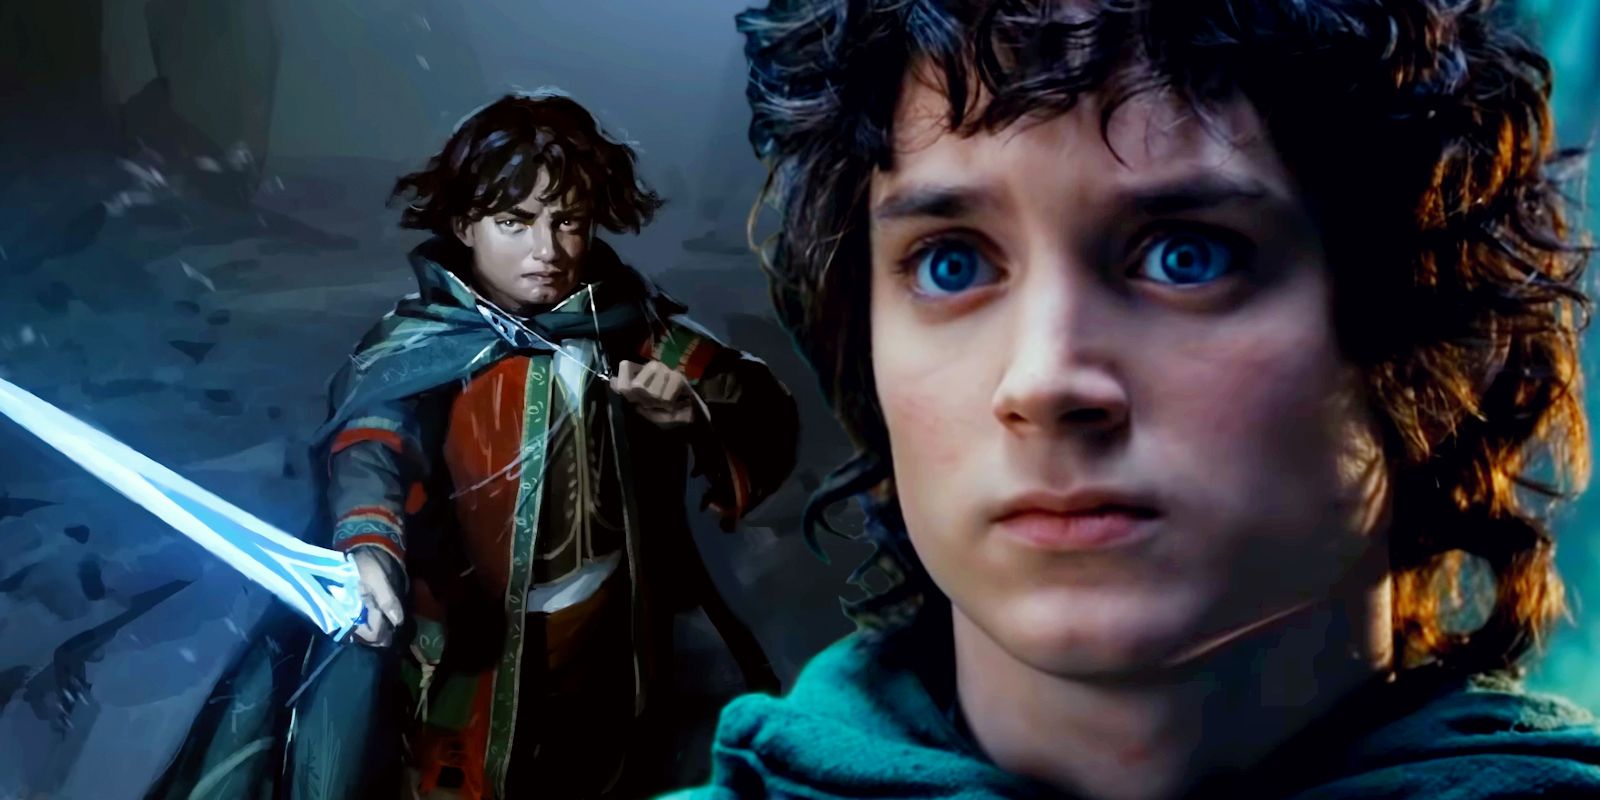 Elijah Wood as Frodo Baggins in the Lord of the Rings films next to an illustration of Frodo made for Magic: The Gathering's upcoming LOTR collaboration set.